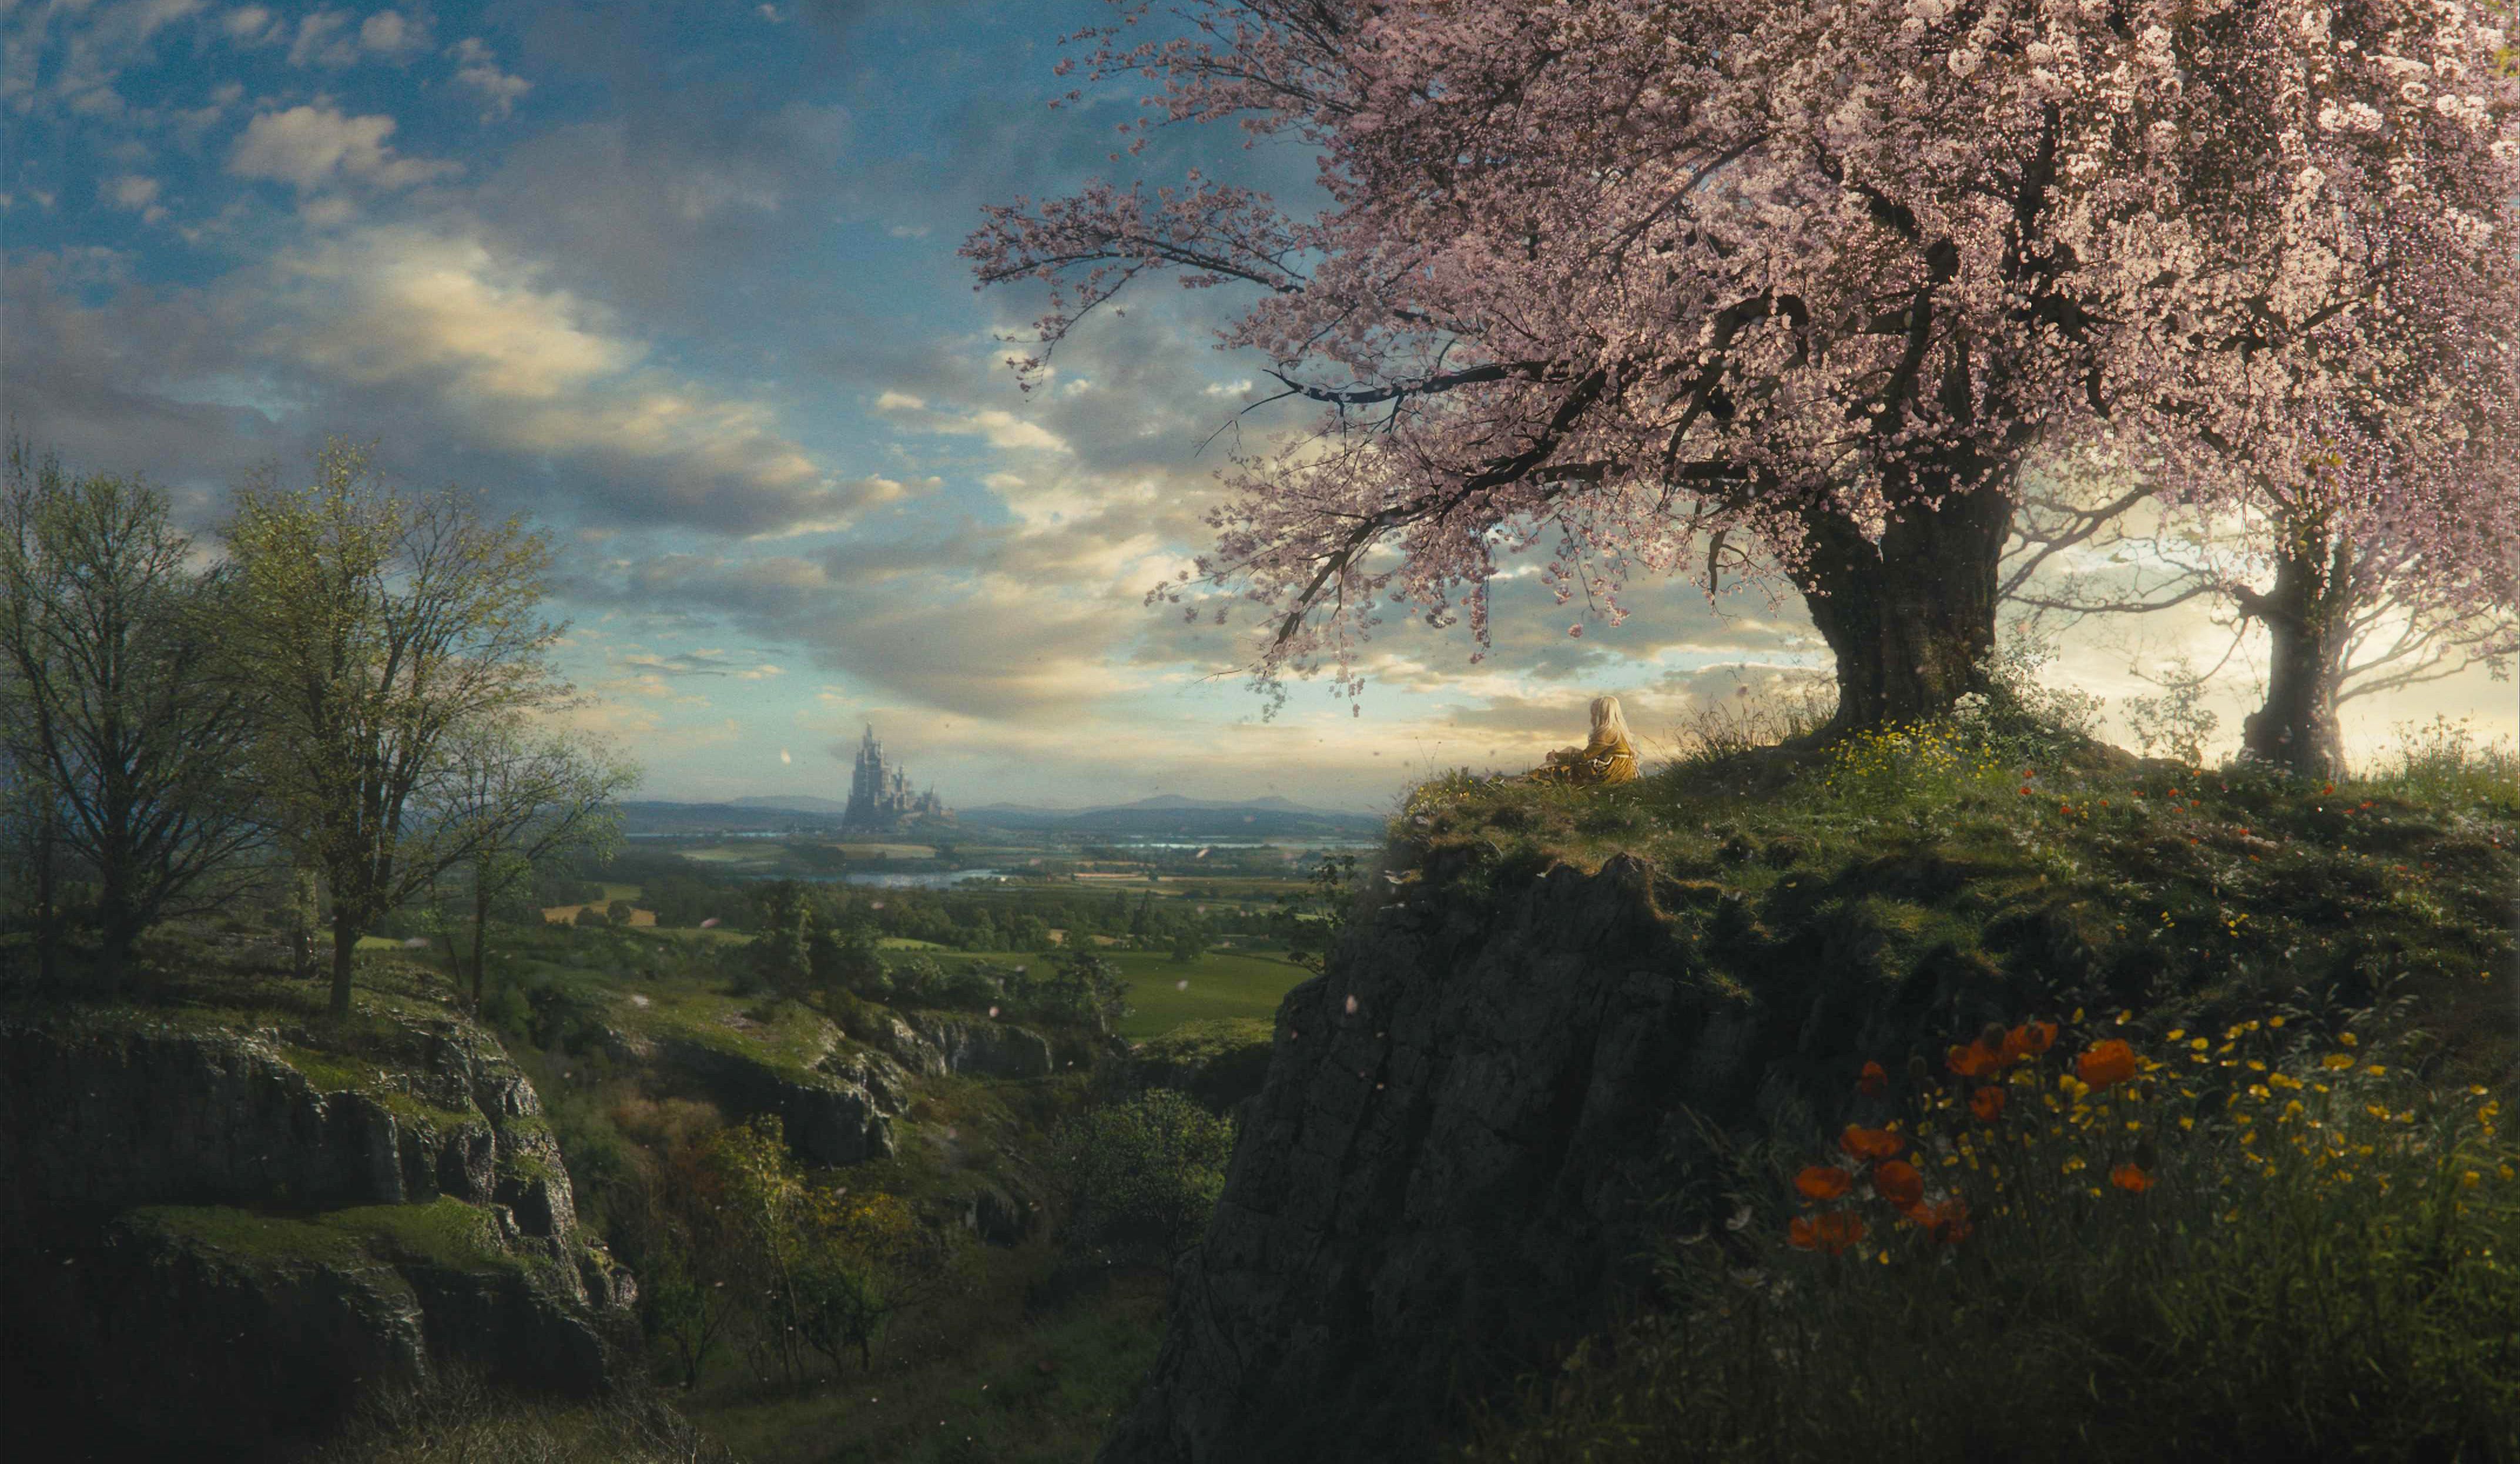 The Castle On Maleficent And Moors Fantasy Landscape